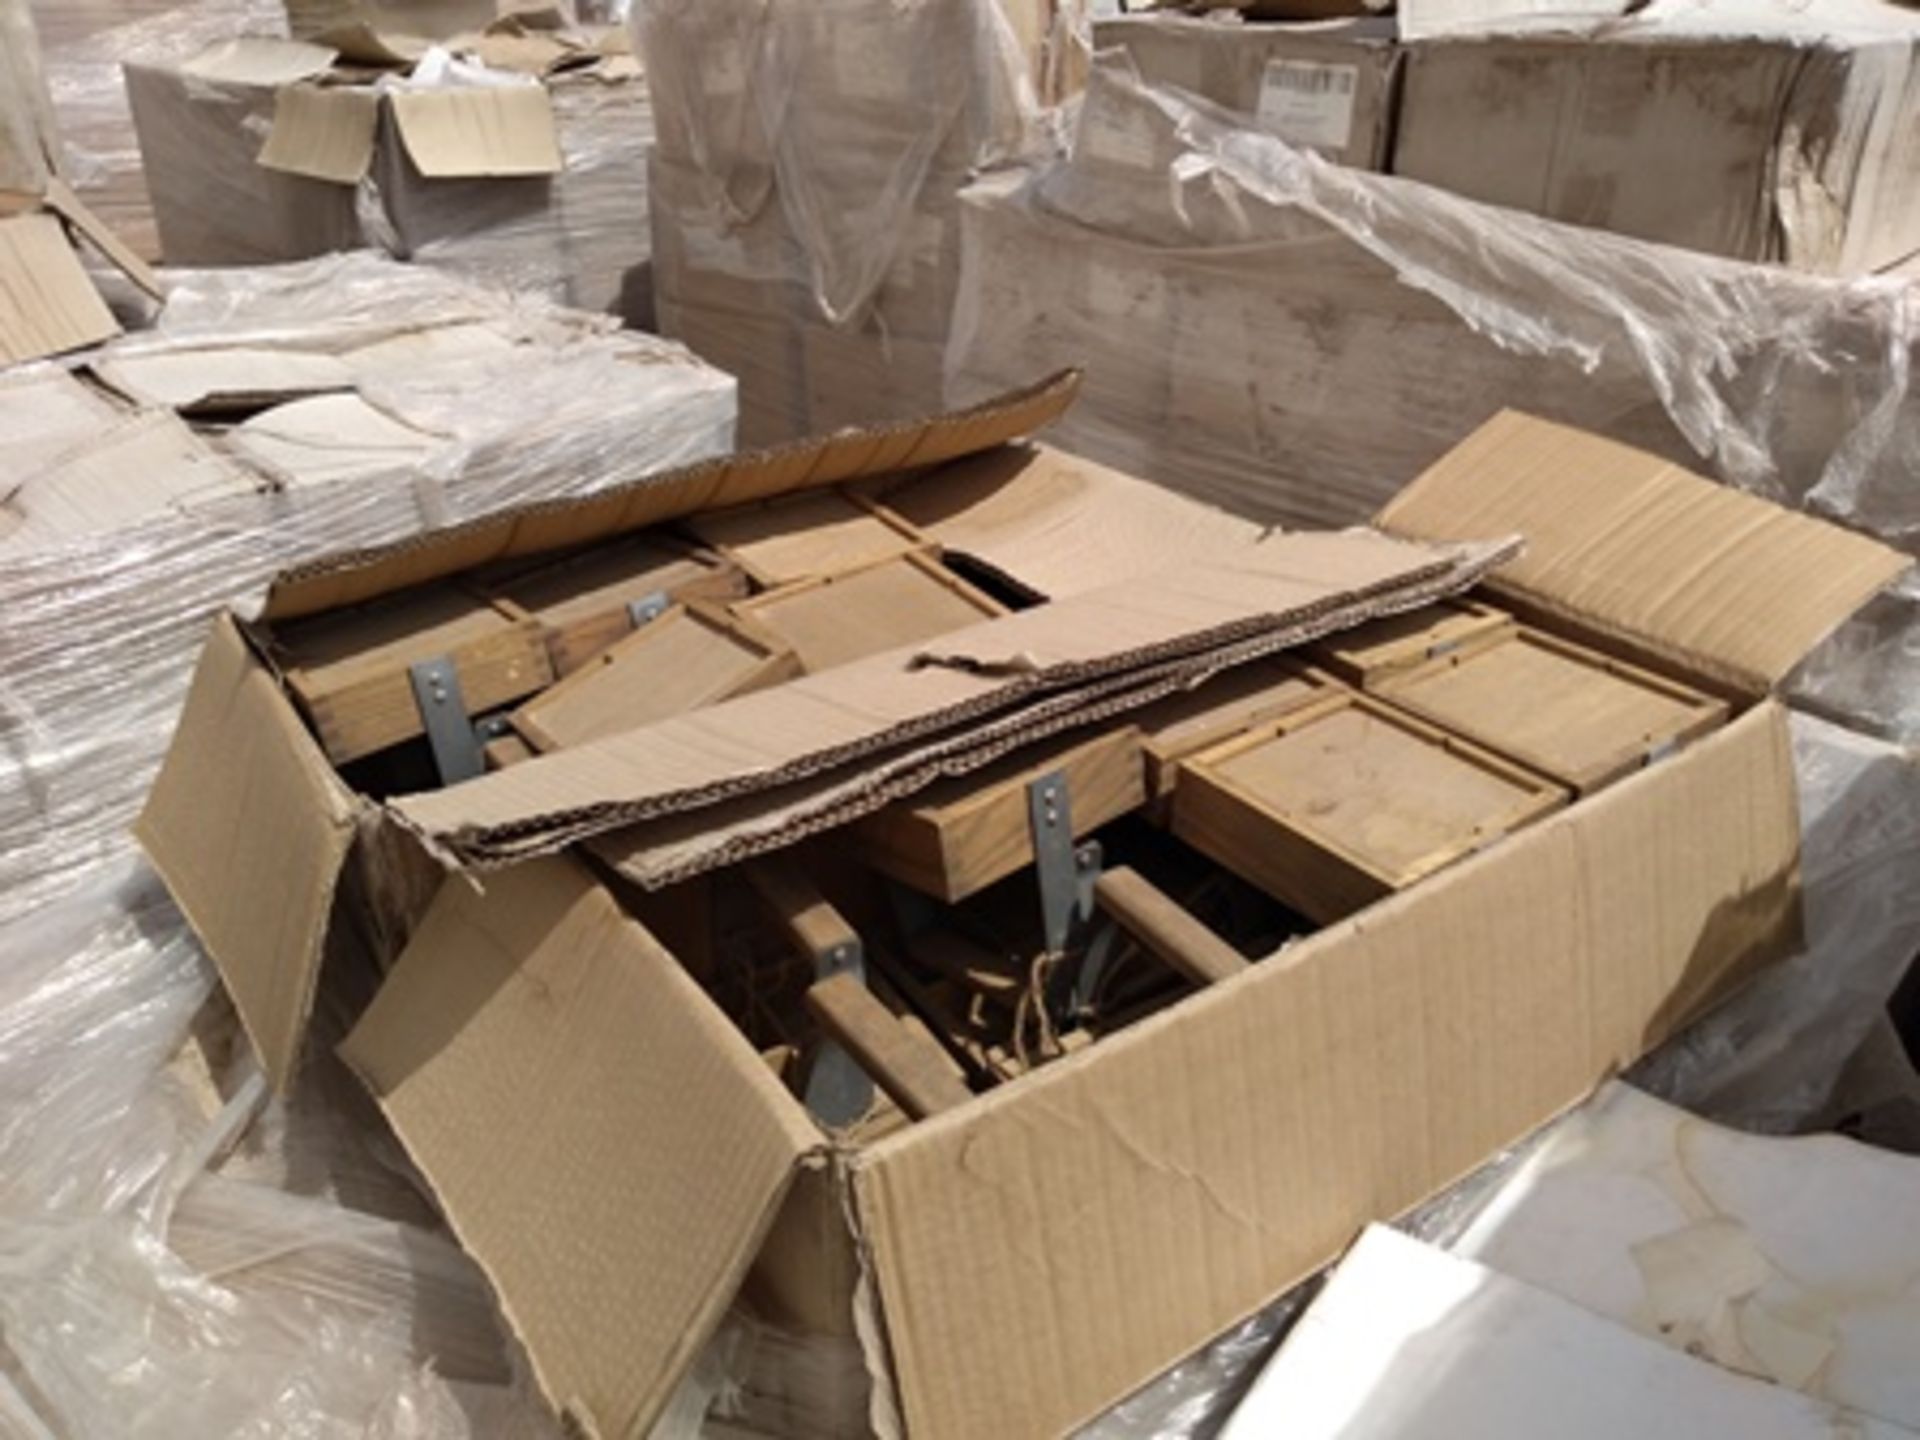 16 pallets containing: 500 boxes of finished product (egraved and shaped esteatita stones). - Image 15 of 22